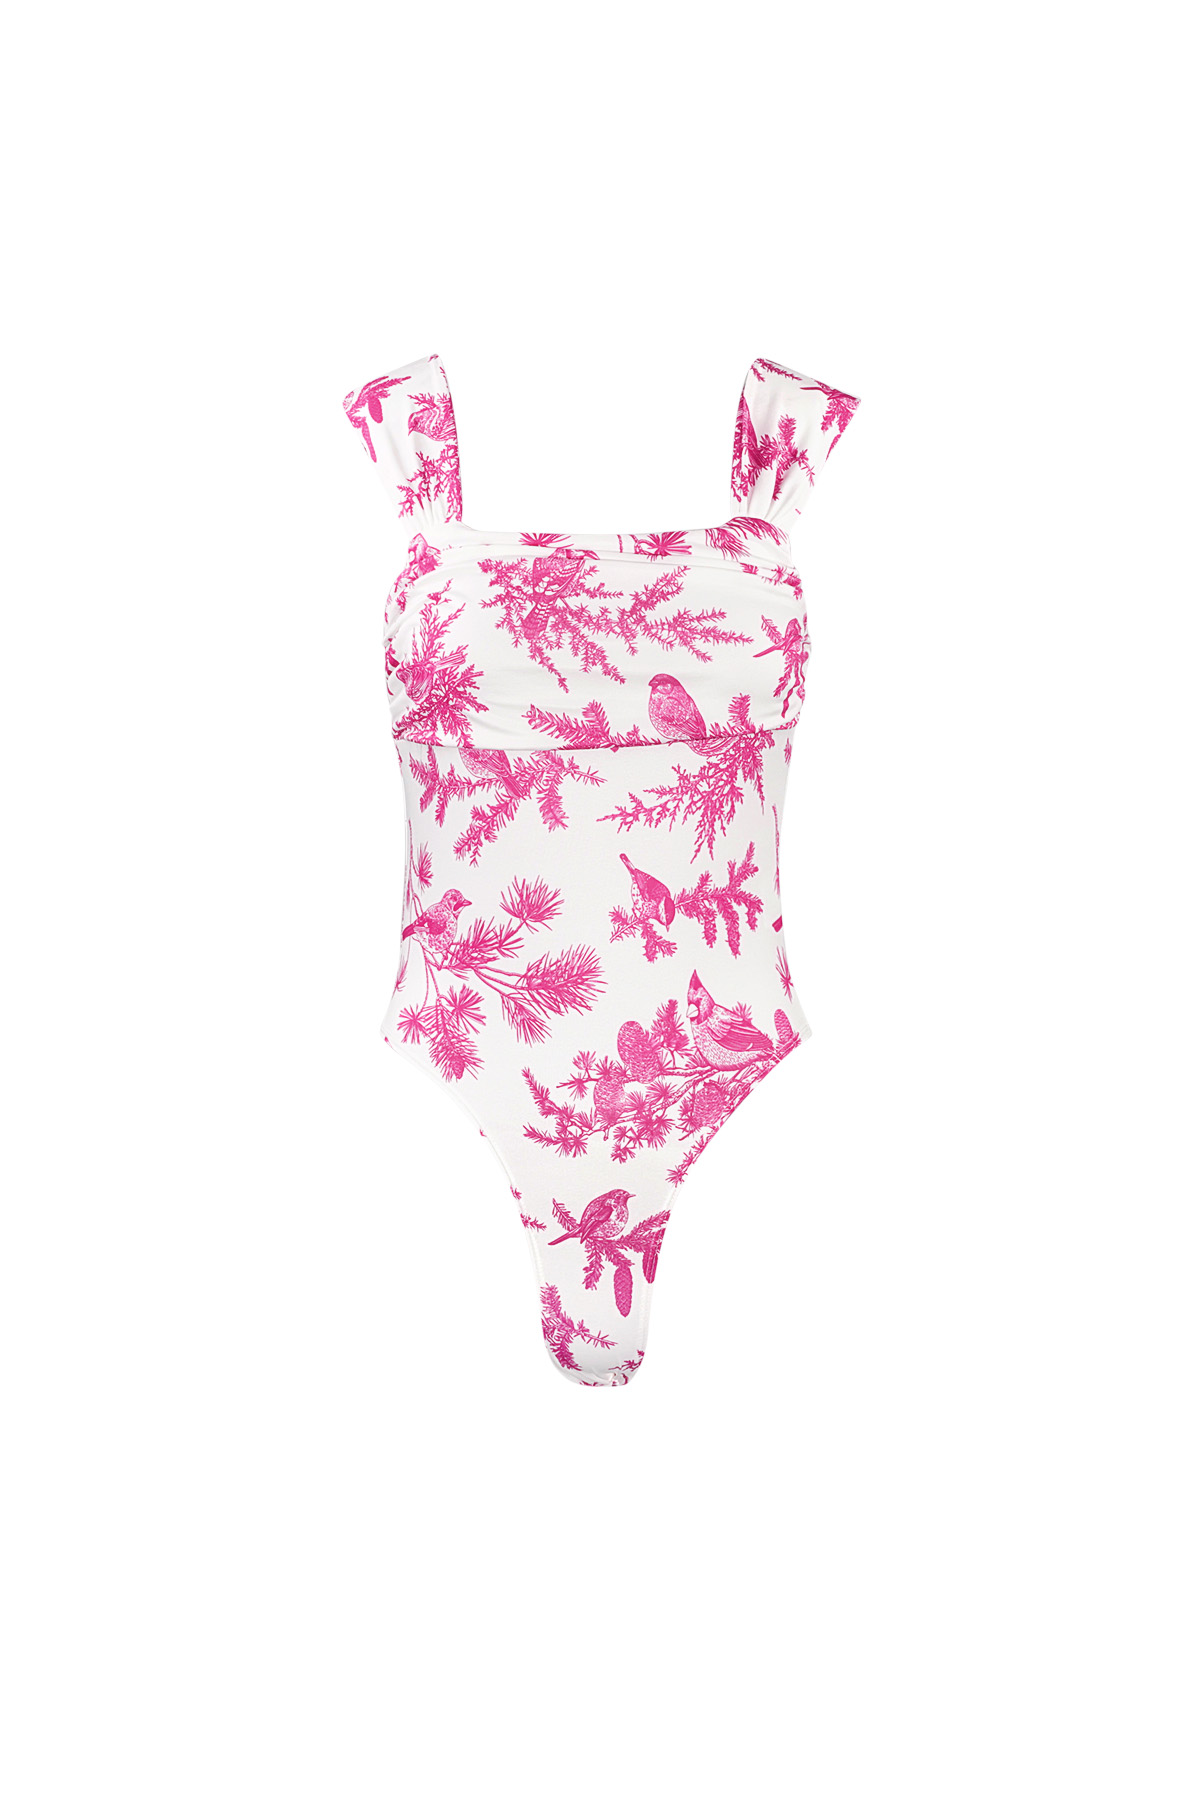 Flowery colorful body - pink